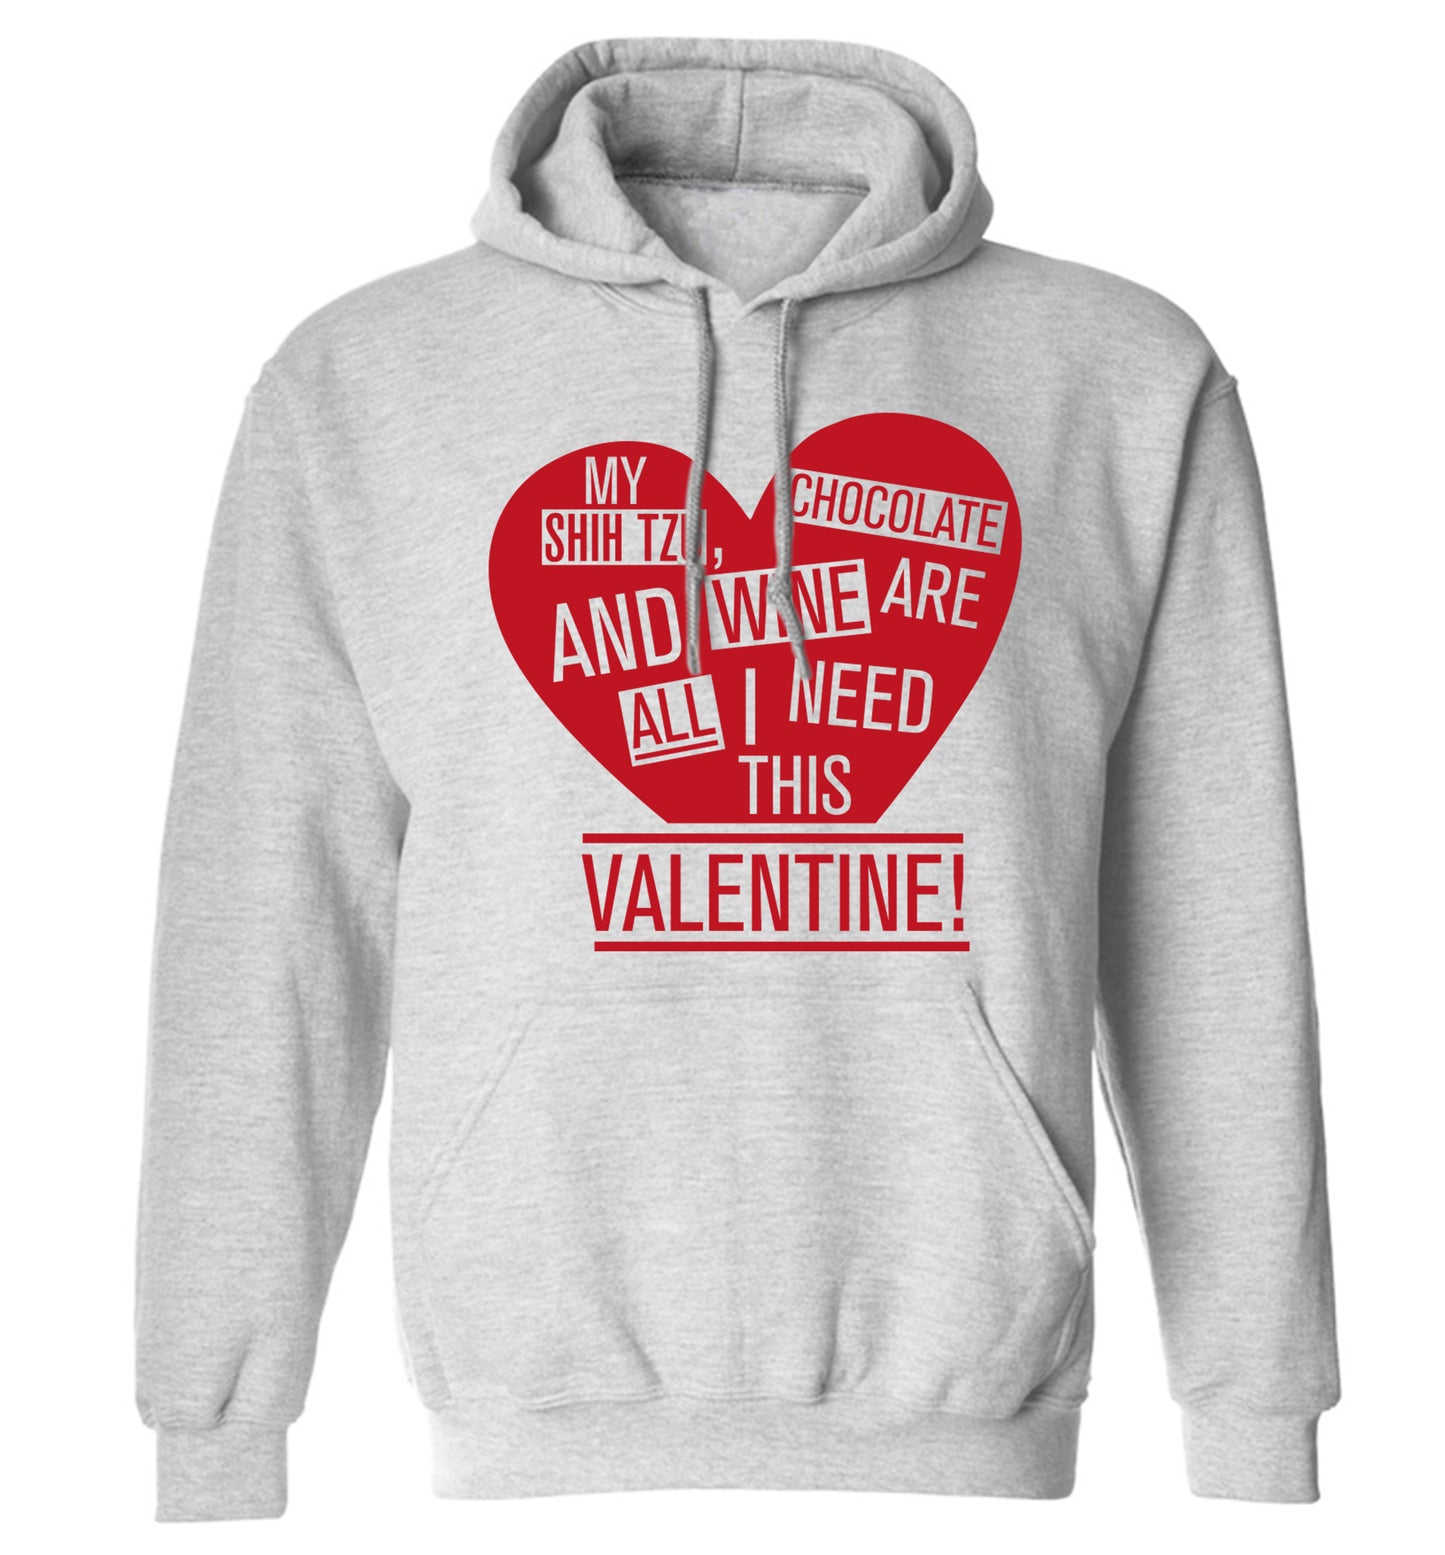 My shih tzu, chocolate and wine are all I need this valentine! adults unisex grey hoodie 2XL